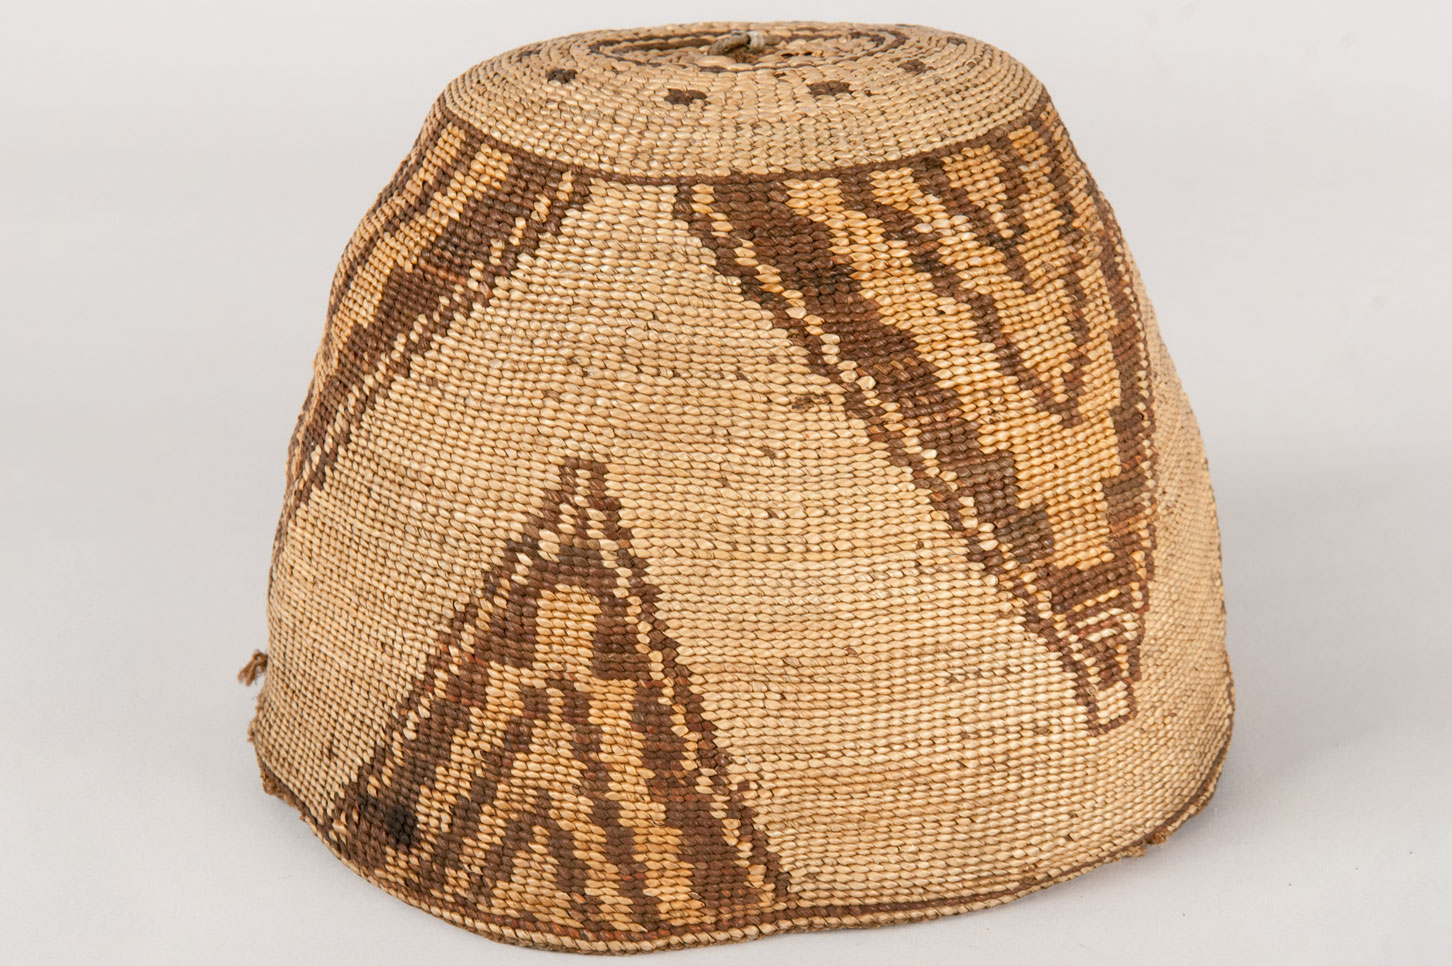 Subconical shaped basket hat made from hemp and beargrass. Designs on the outside of hat feature a three part division of separated dovetail and step patterns on a basal line of colors of orange and medium dark brown.